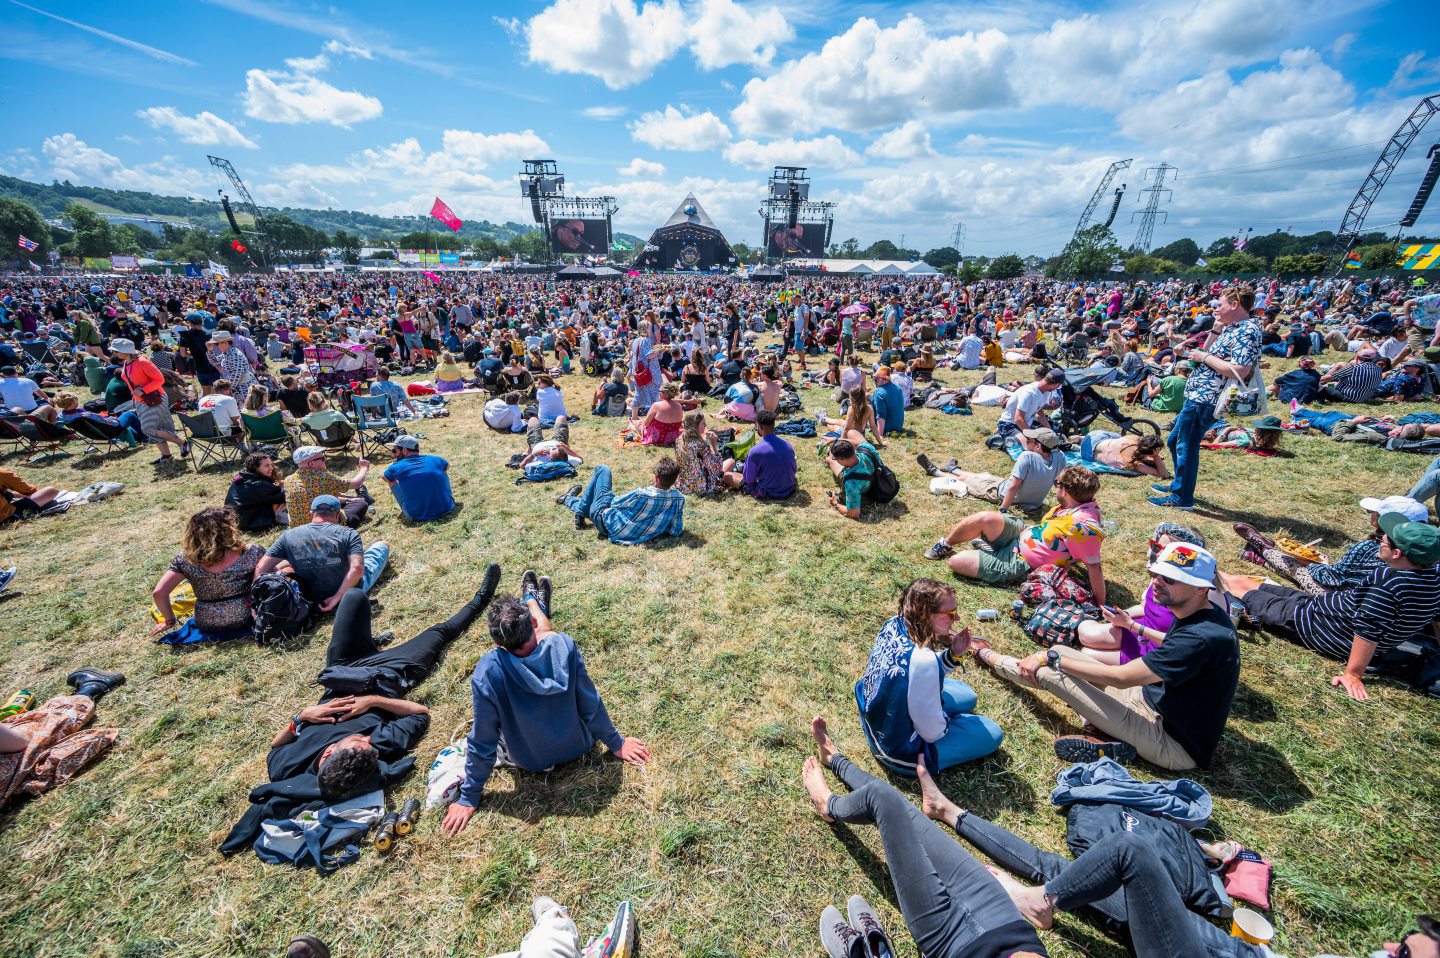 Music fans at Glastonbury relax in the sun.